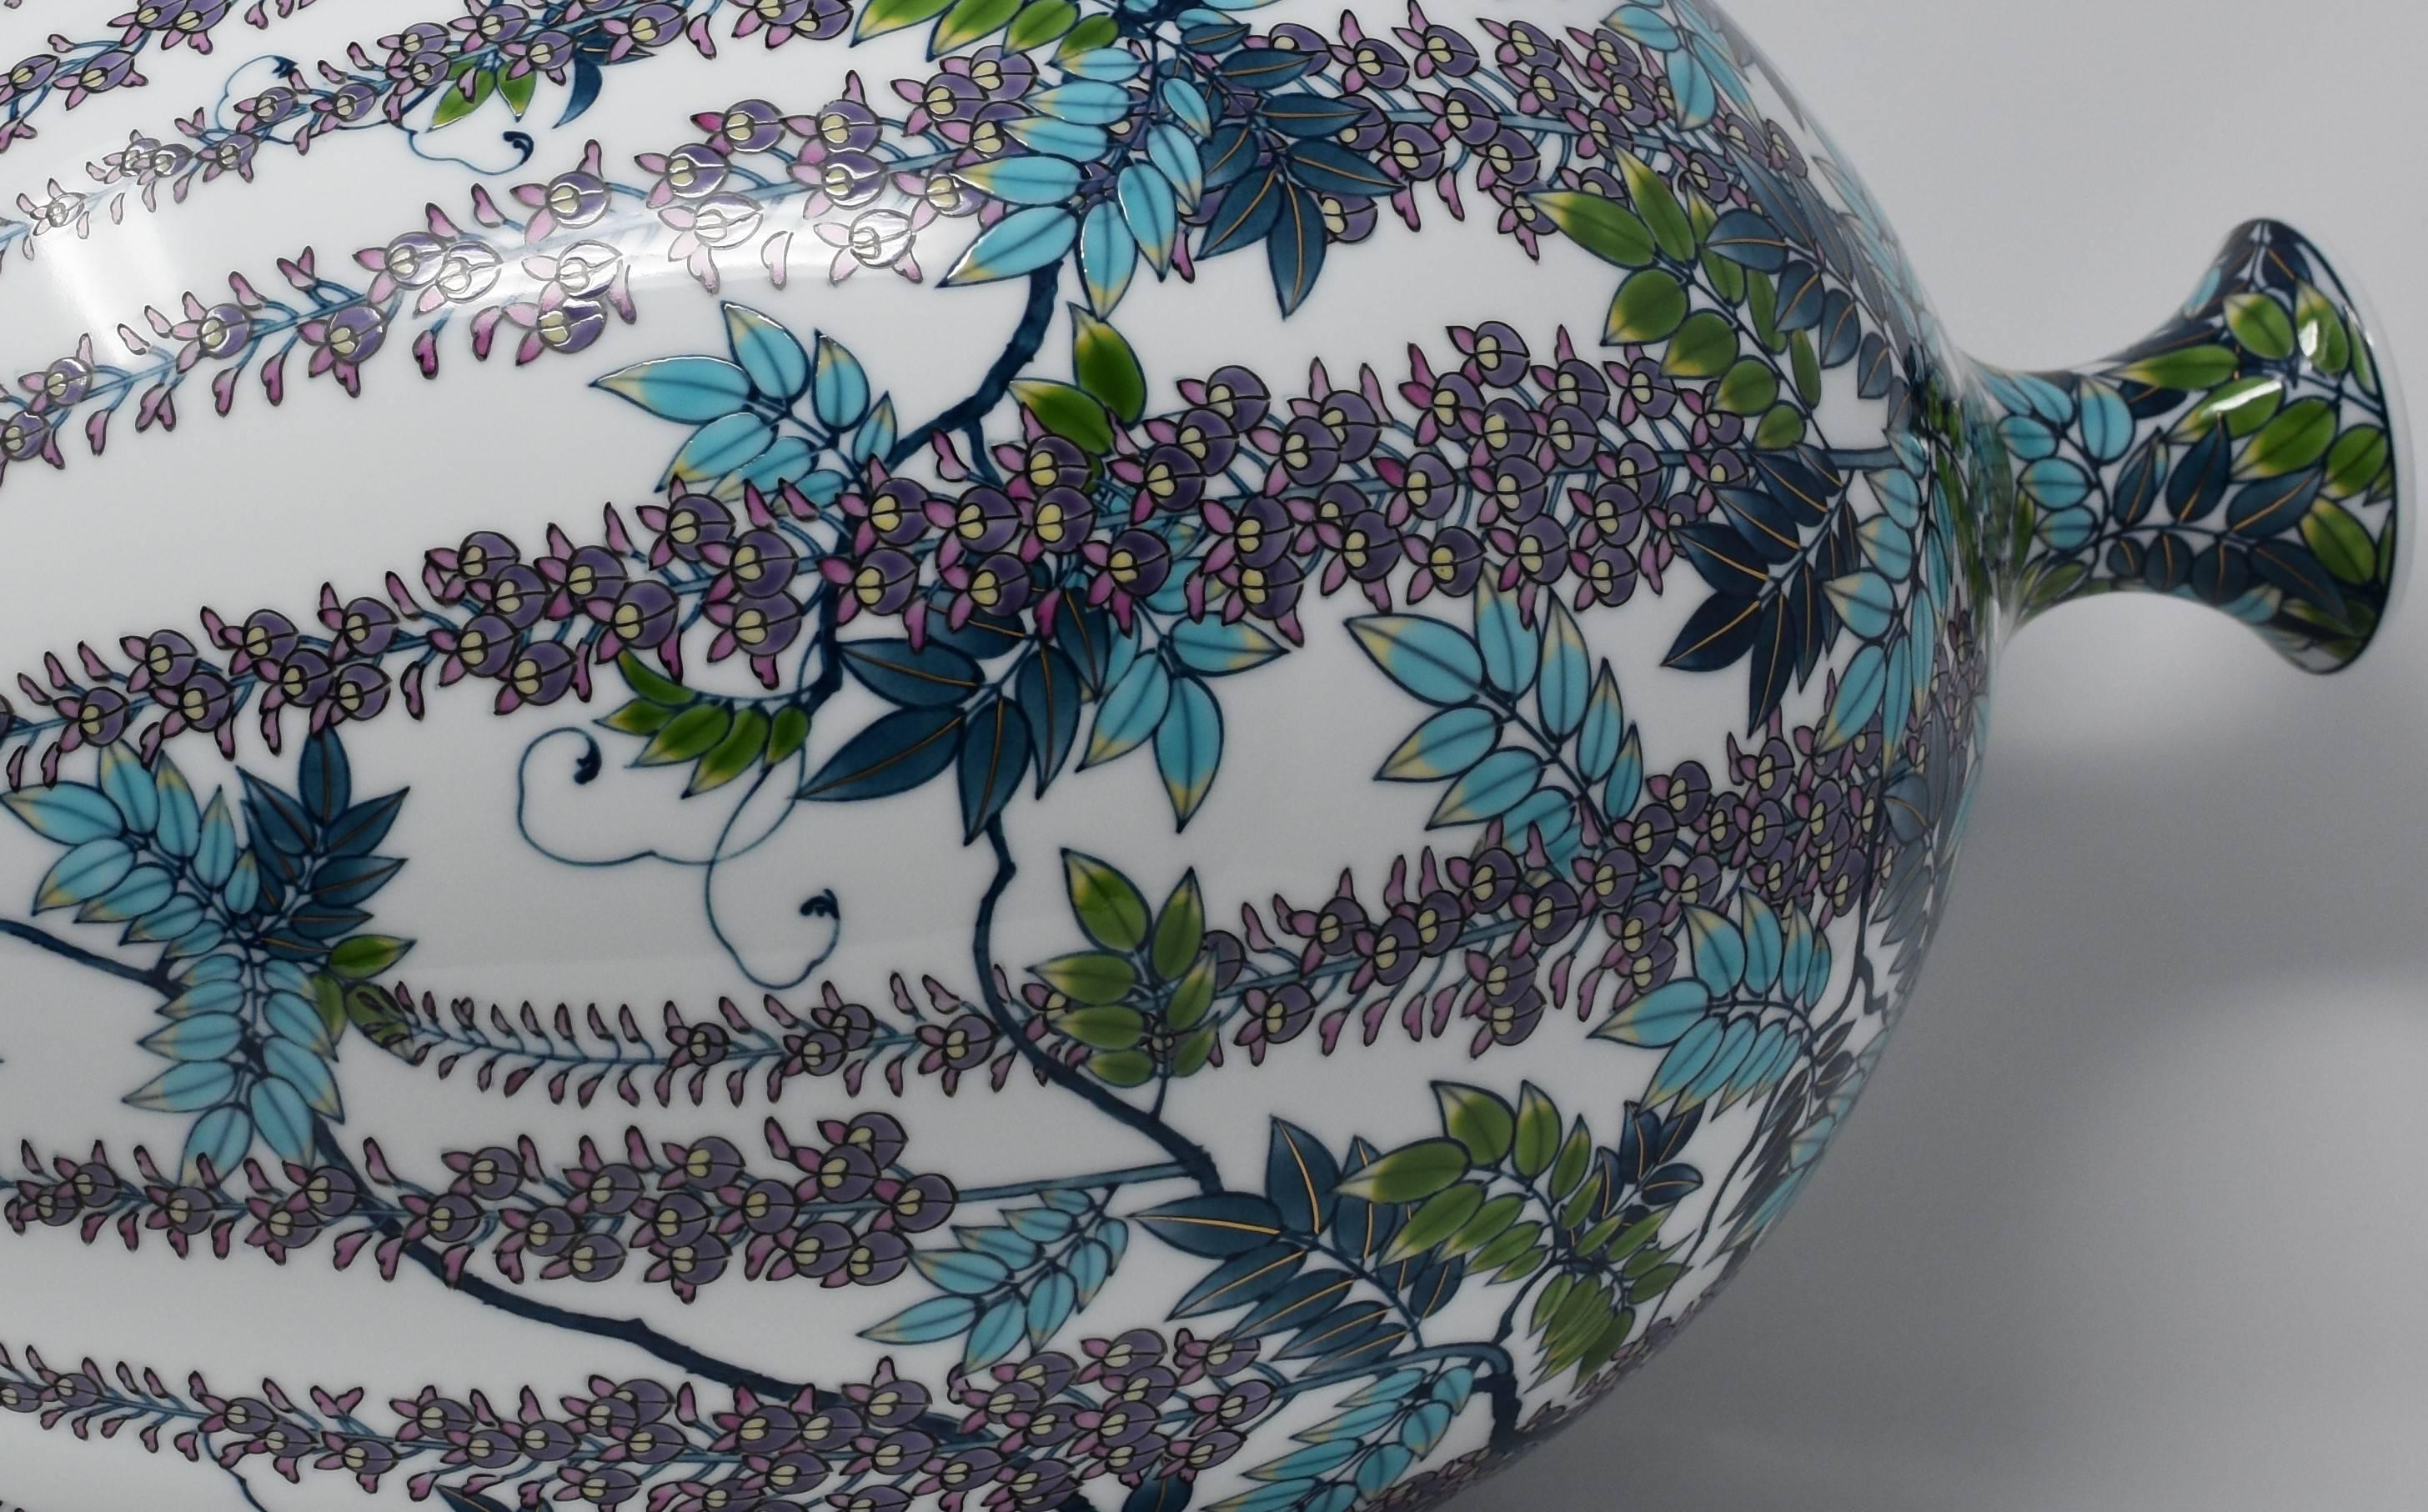 Extraordinary Japanese contemporary museum-quality decorative porcelain vase, extremely intricately hand-painted in the artist's signature turqoise blue and purple on a stunning baluster shape porcelain body, a signed masterpiece by highly